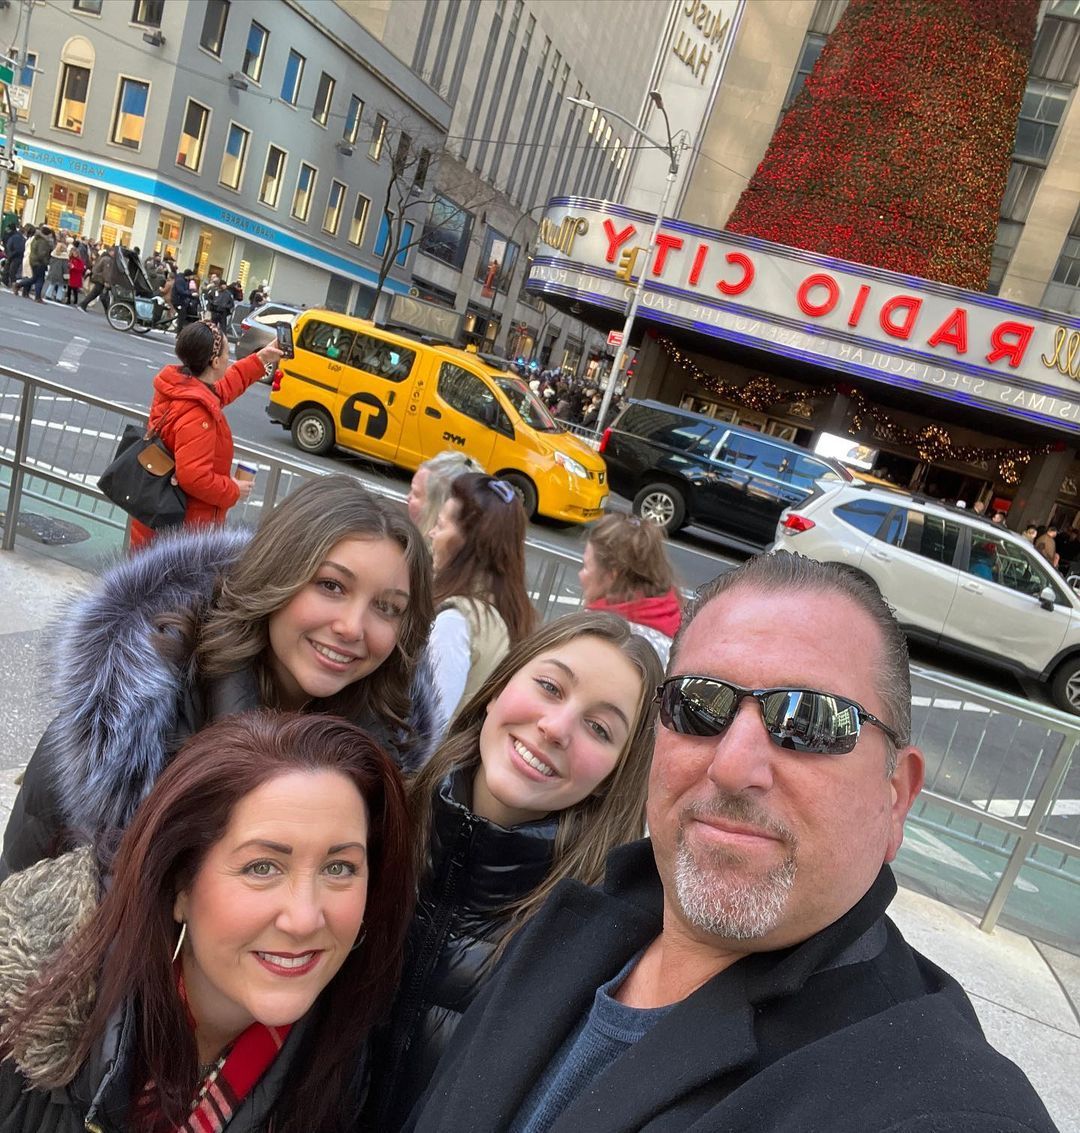 <p>So apparently got locked out of original #stonecreationsoflongisland because there weren’t enough #selfiesunday   Ok #instragram   From work to #familytime #stonecreationsoflongislandinc #rockefellercenter #nyc   (at Times Square, New York City)<br/>
<a href="https://www.instagram.com/p/ClwZcaiOUMT/?igshid=NGJjMDIxMWI=" target="_blank">https://www.instagram.com/p/ClwZcaiOUMT/?igshid=NGJjMDIxMWI=</a></p>